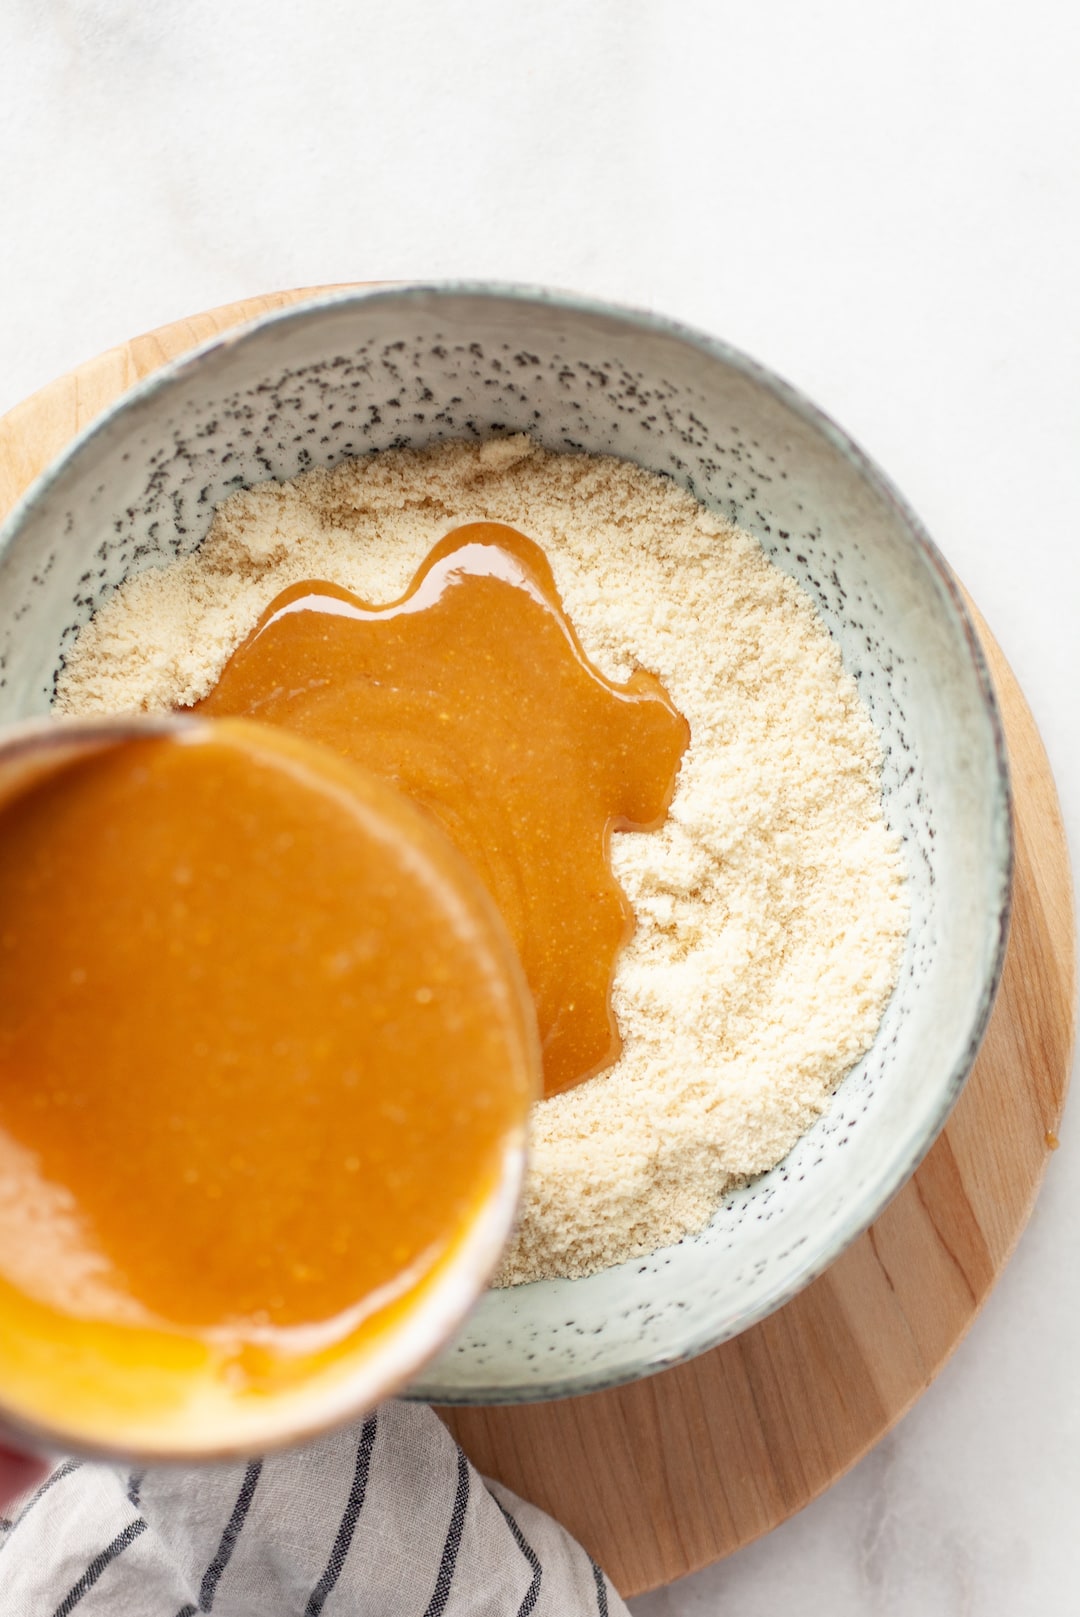 Almond flour in a bowl with peanut butter mixture being poured into the bowl